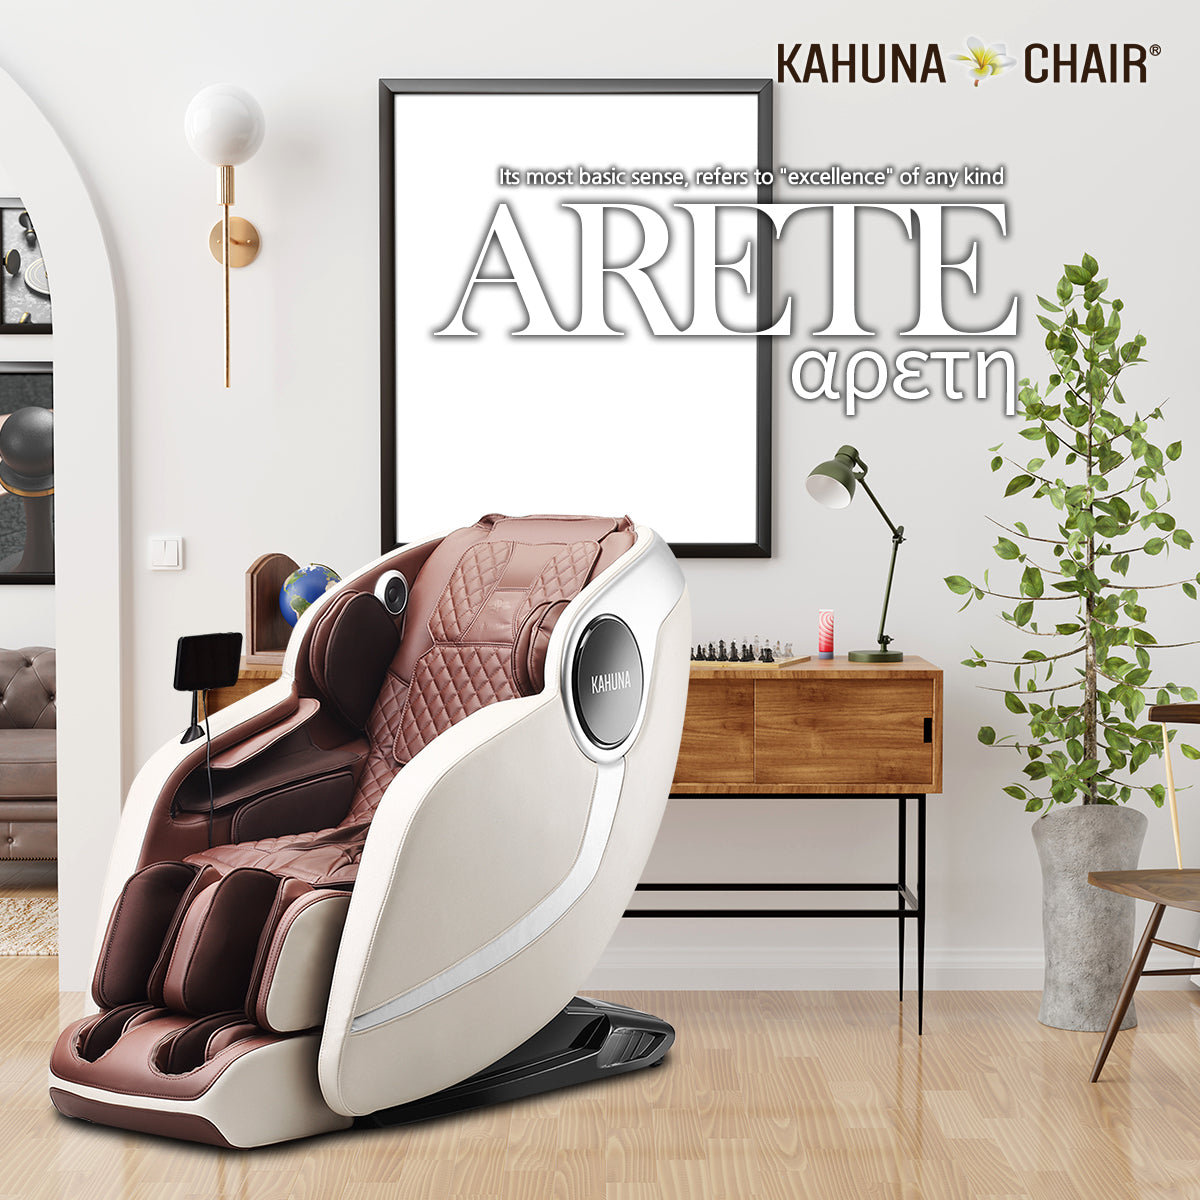 kahuna Em Arete Massage chair its most basic sense refers to excellence of any kind